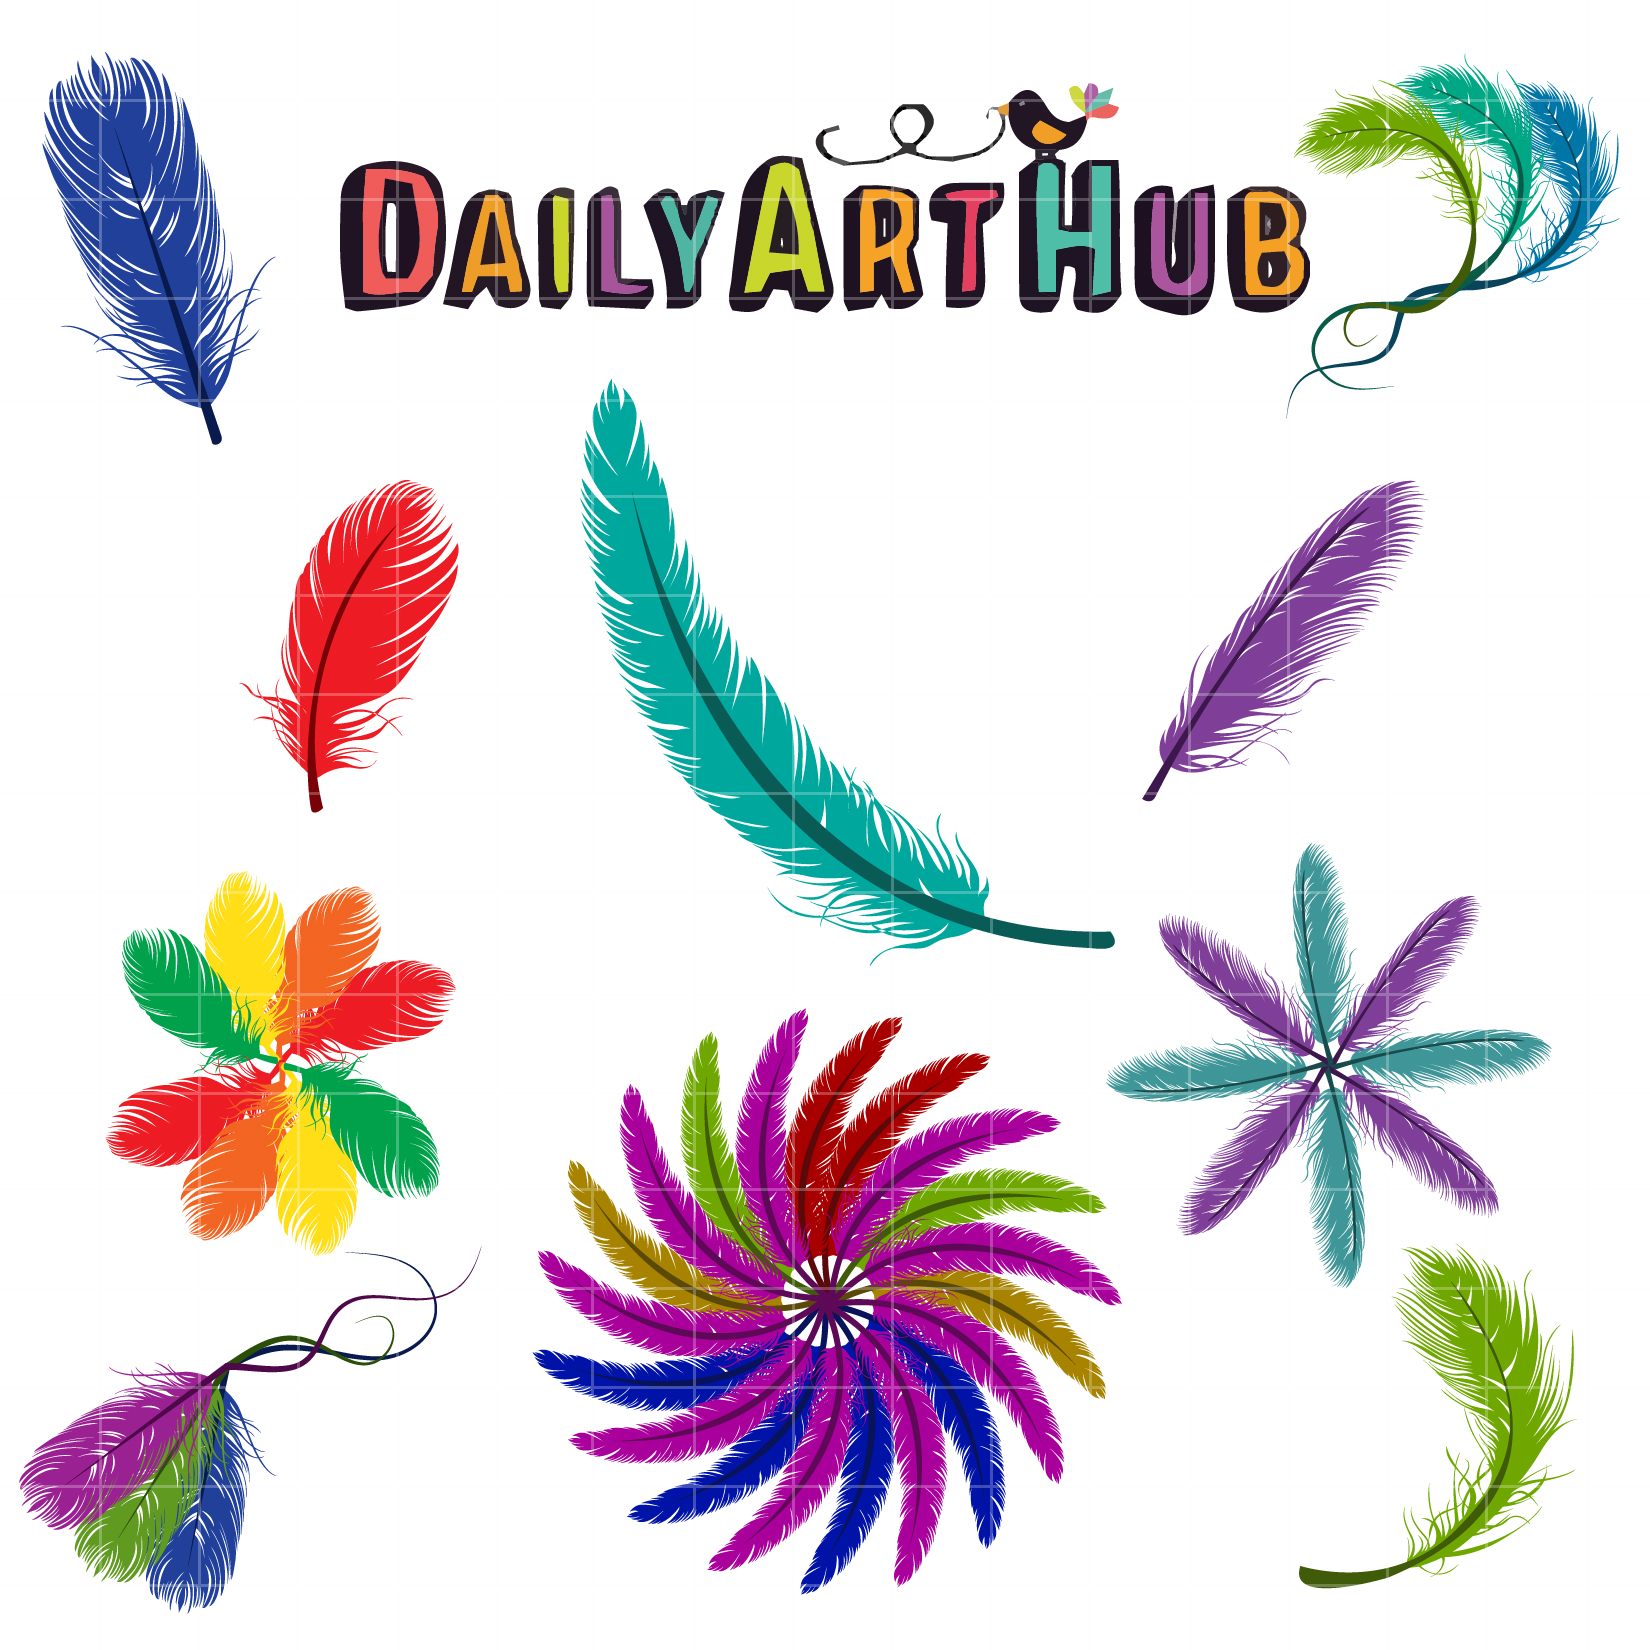 Colorful Feather Designs Clip Art Set – Daily Art Hub // Graphics ...